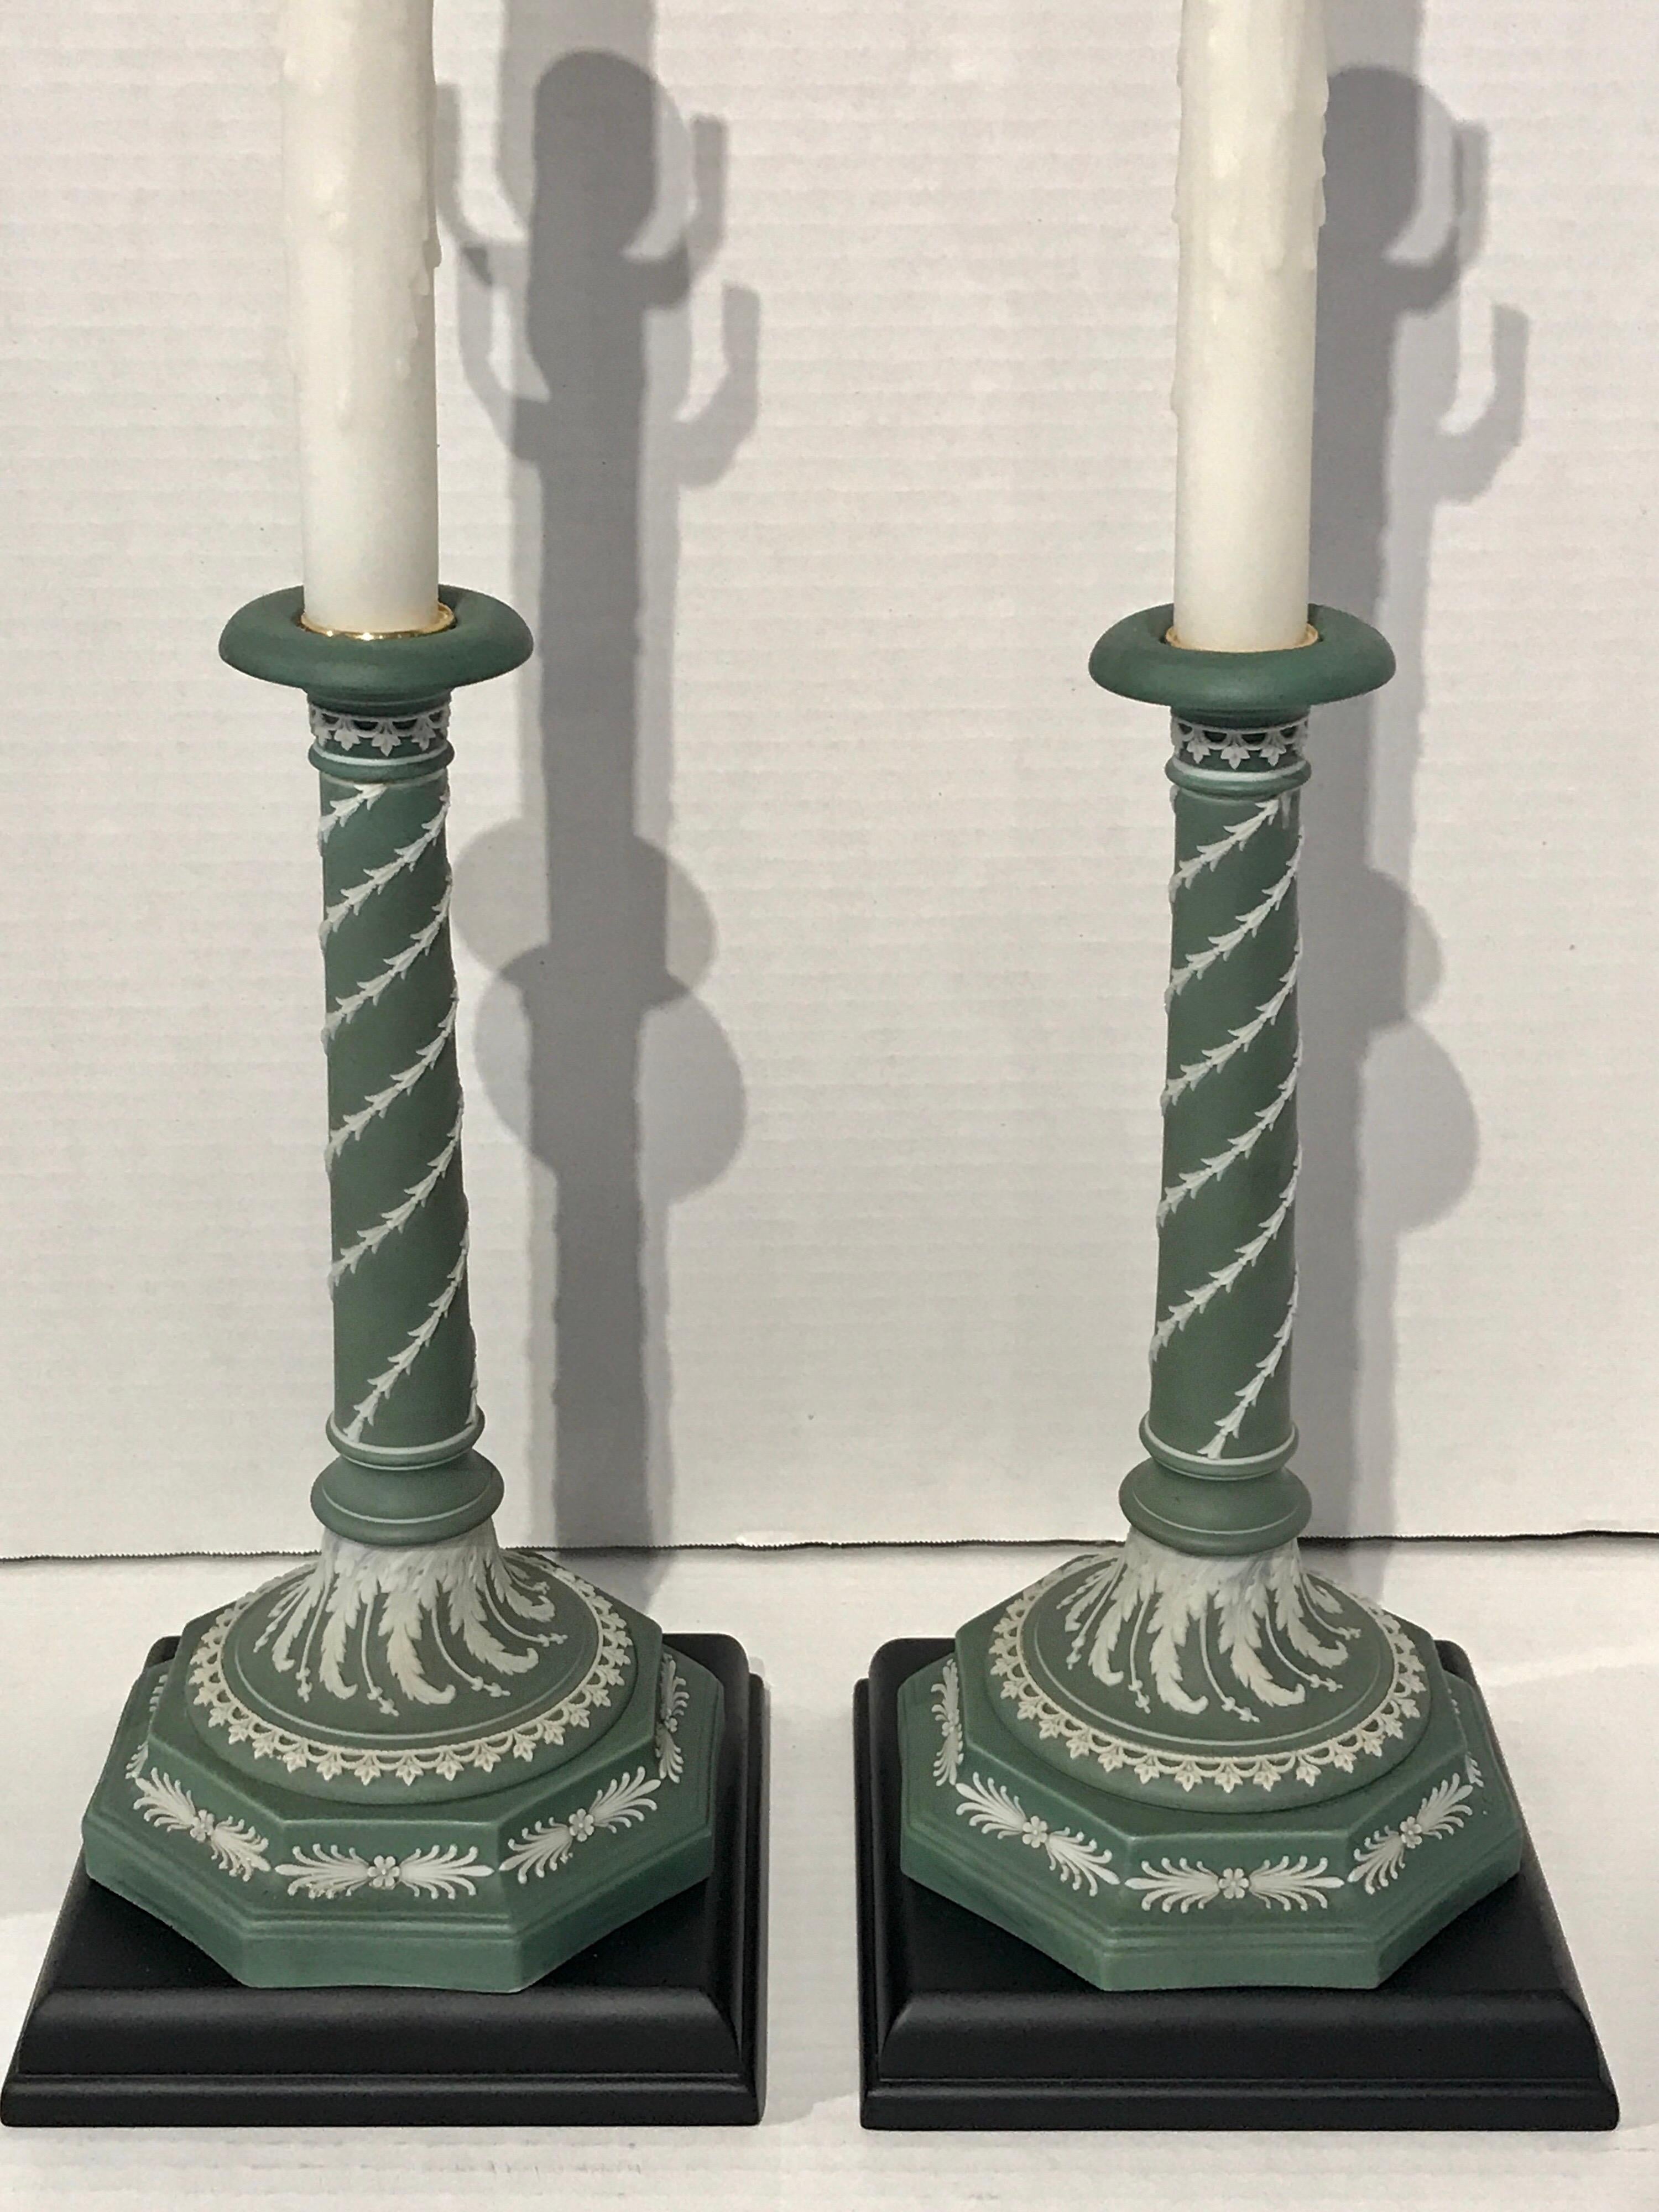 Pair of olive green and white Wedgwood candlesticks, now as lamps, Each one mounted on a ebonized wood base. The candlesticks alone are 5.5